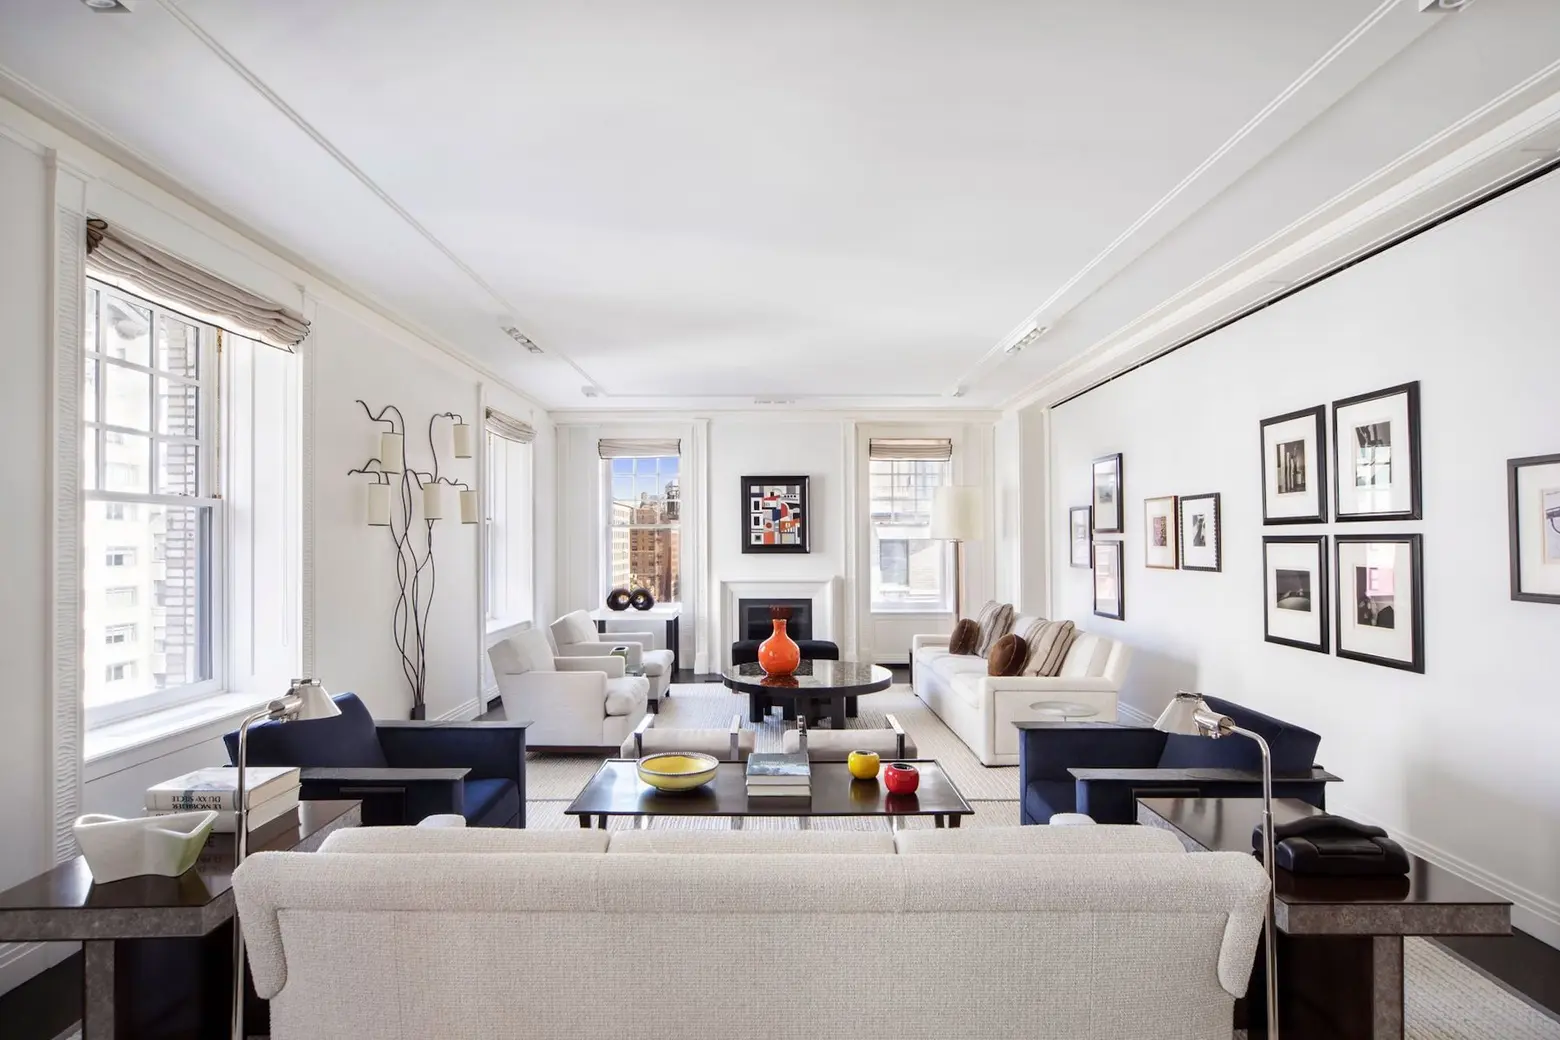 For $14M, this full-floor Upper East Side condo feels like a designer show house, wine room and gallery included